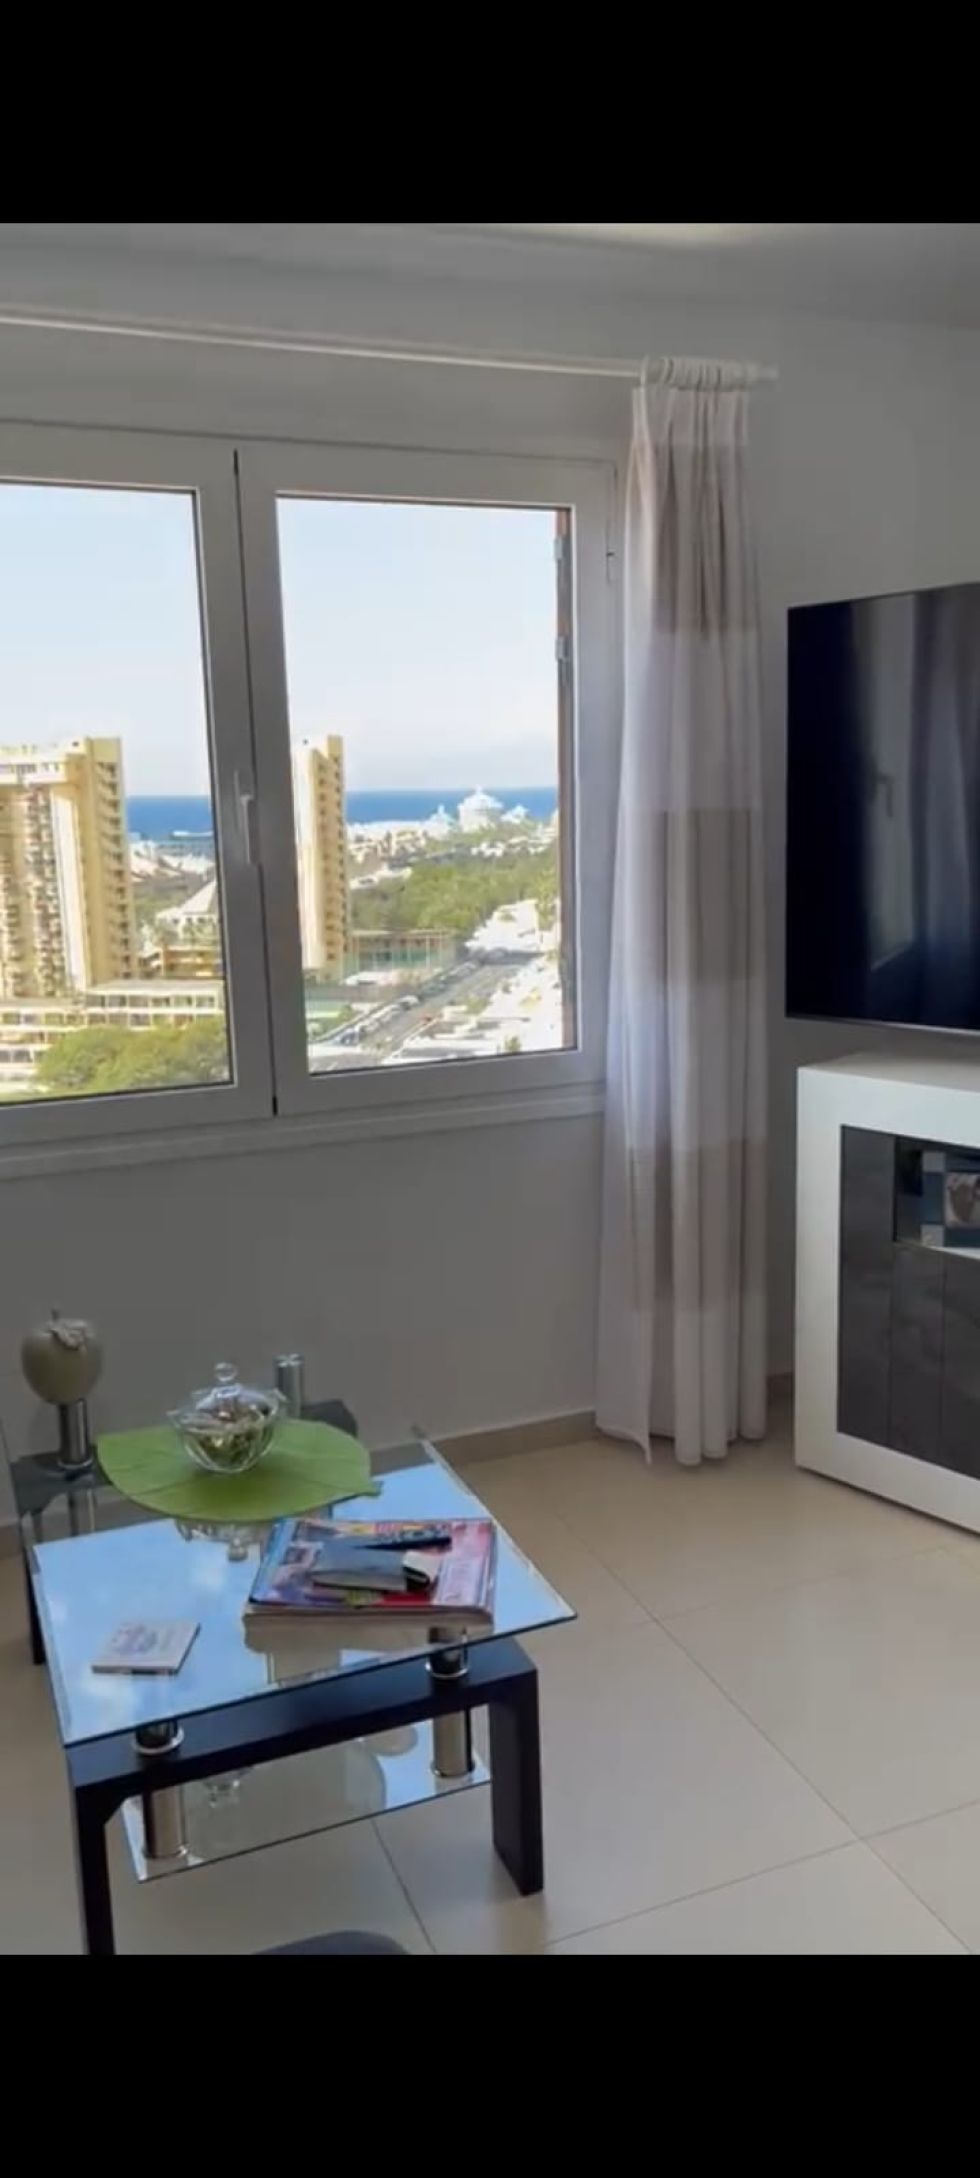 Penthouse for sale in  Los Cristianos, Spain - TRC-2358